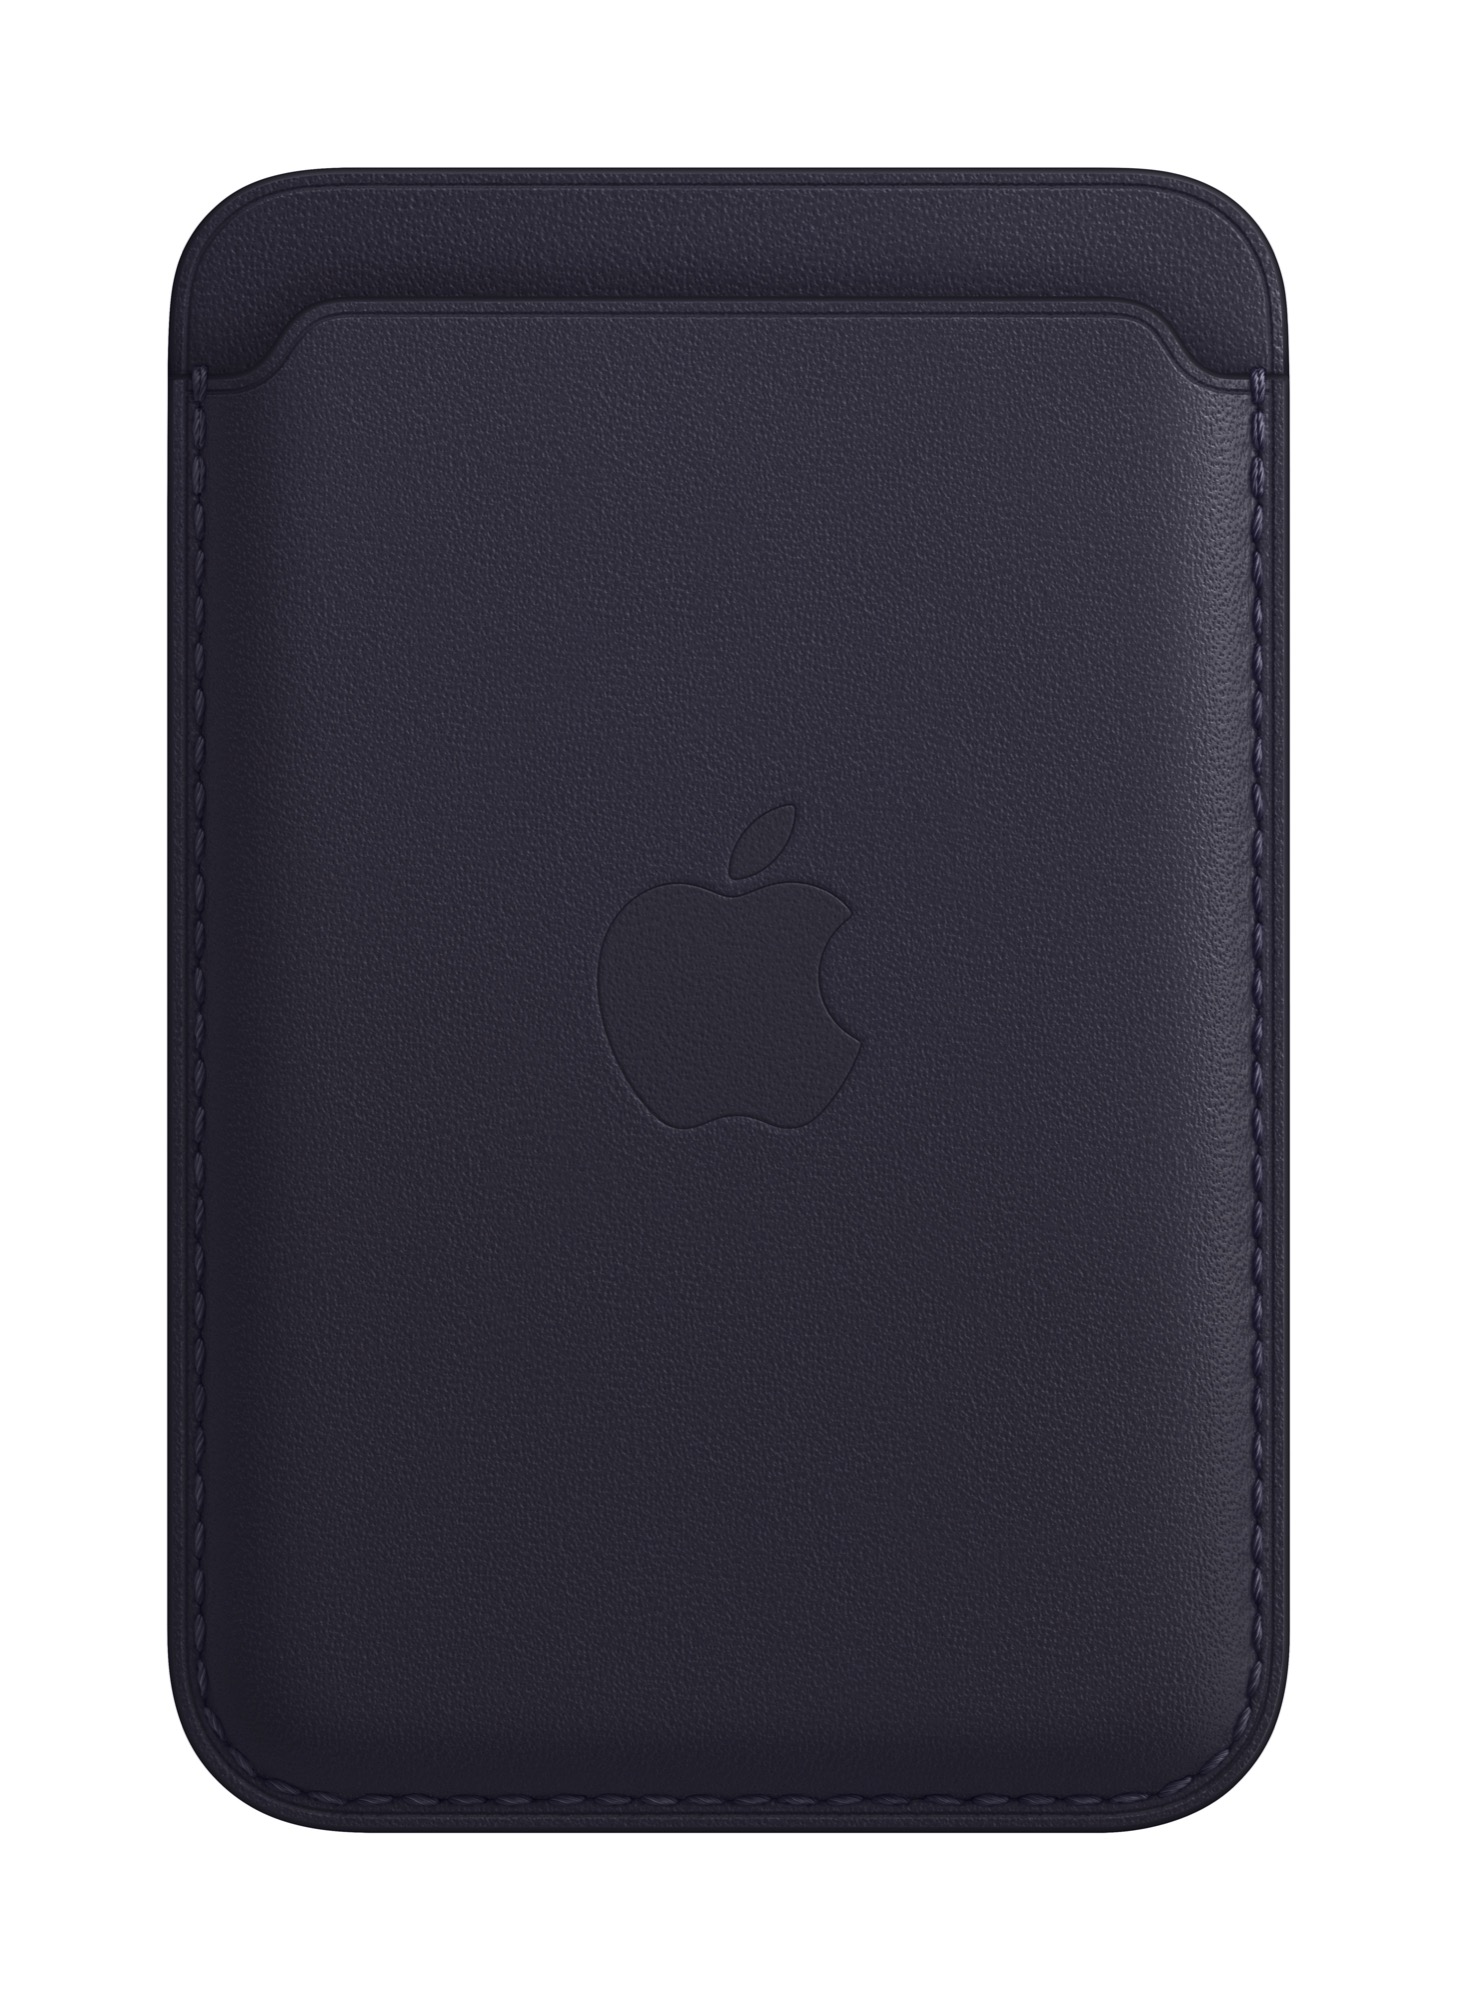 APPLE iPhone Leather Wallet with MagSafe